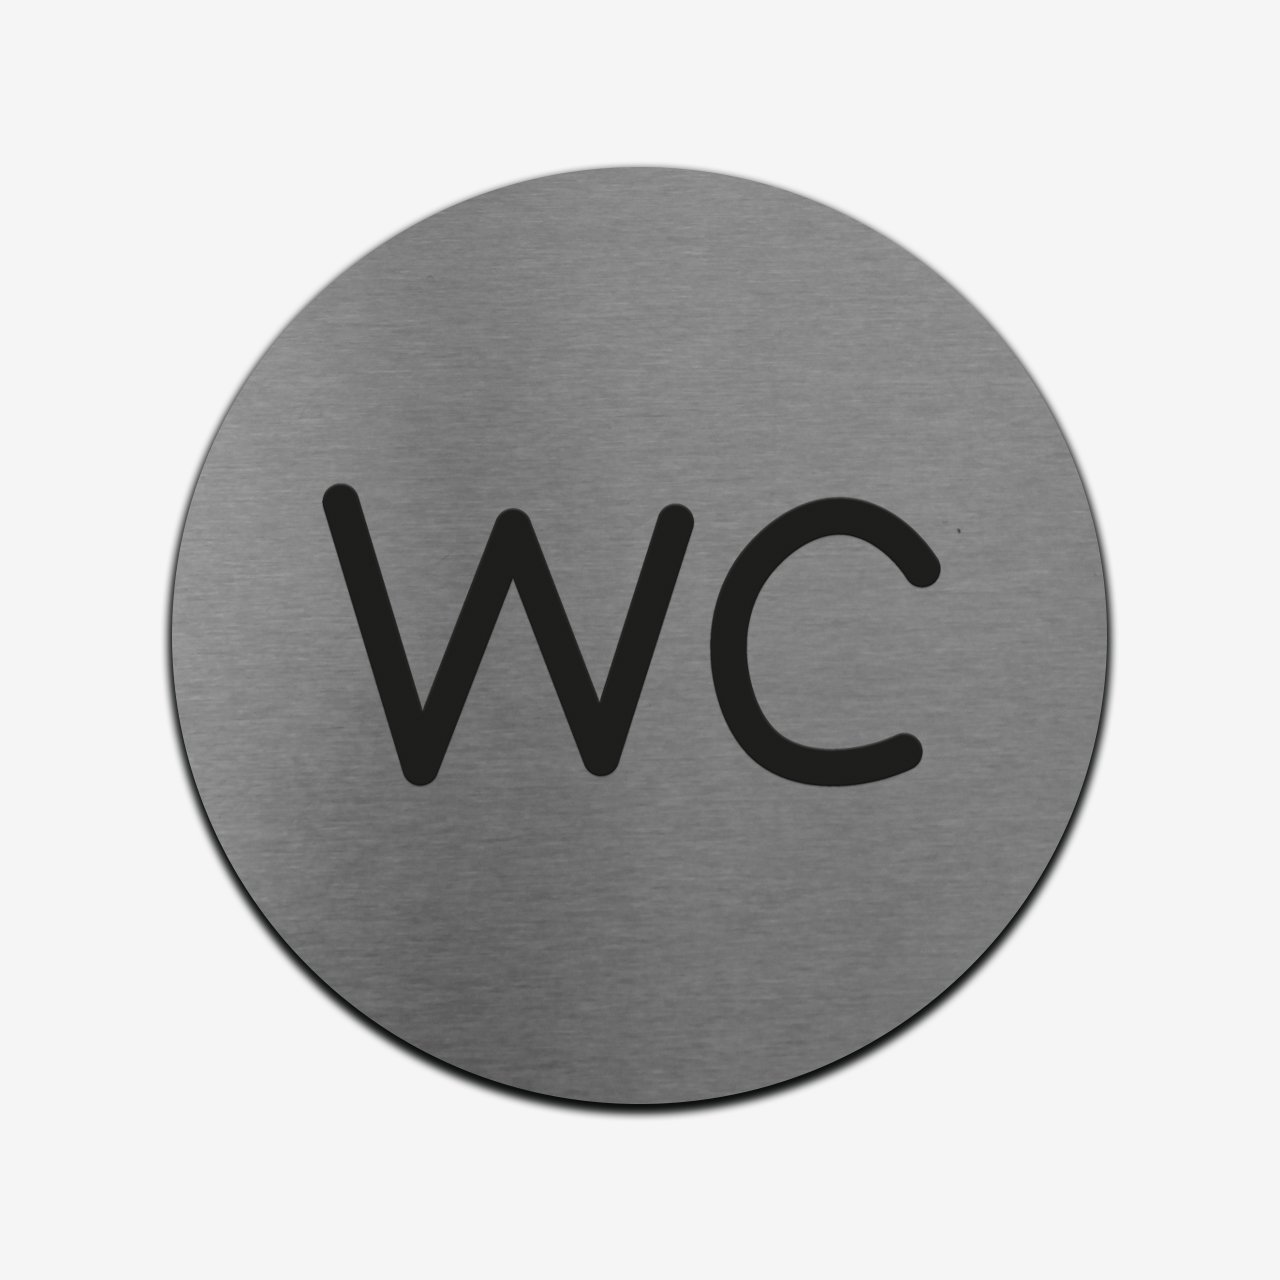 WC - Stainless Steel Sign Bathroom Signs circle Bsign